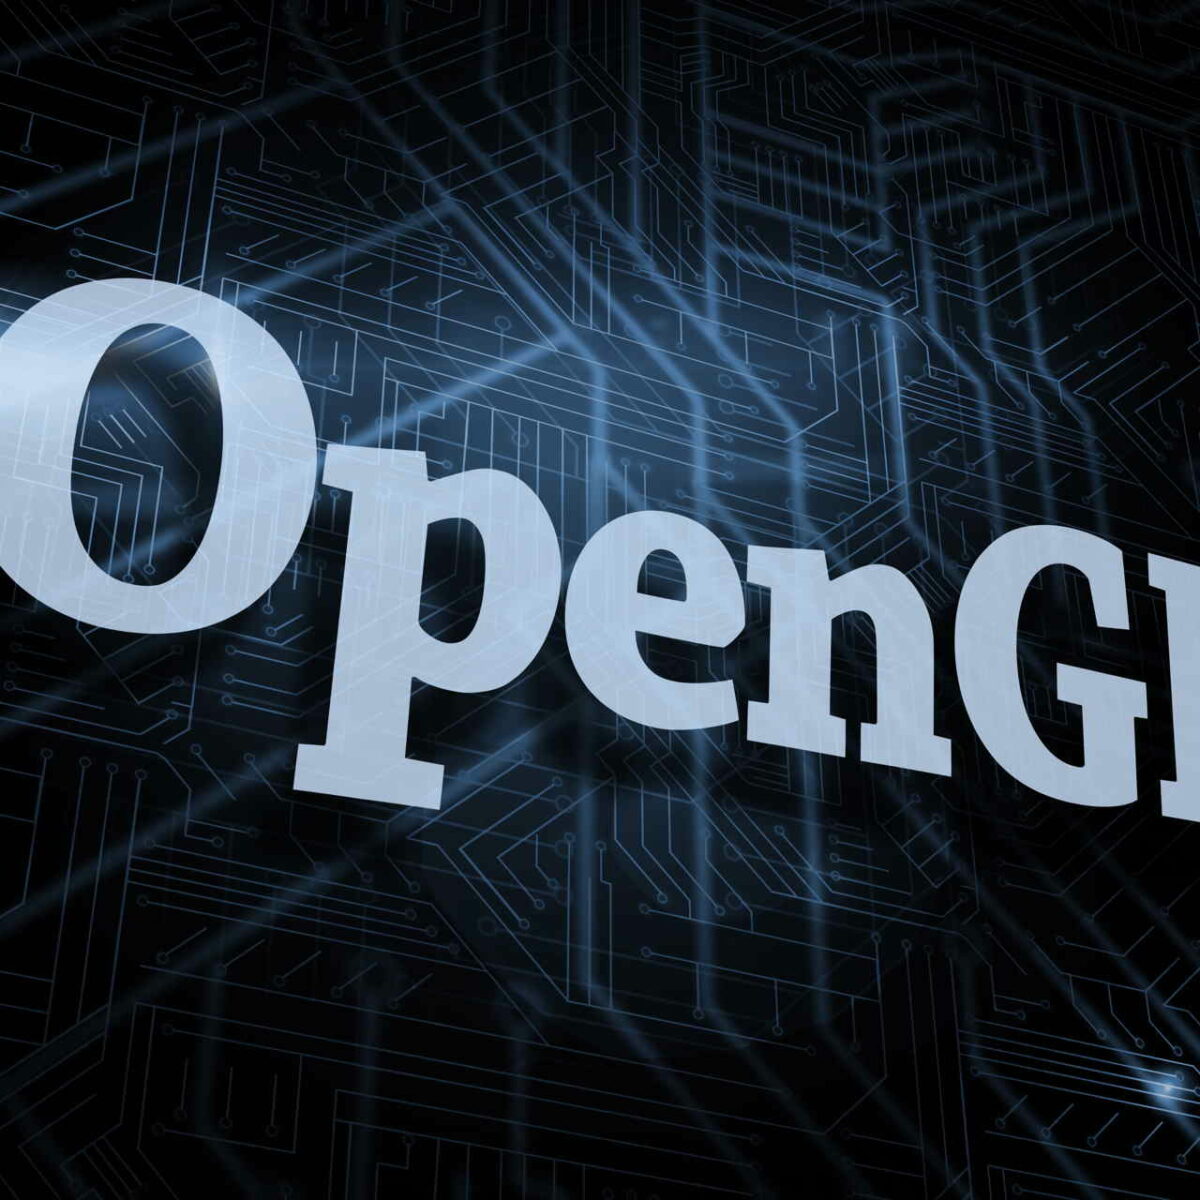 opengl 2.0 compatible video card download